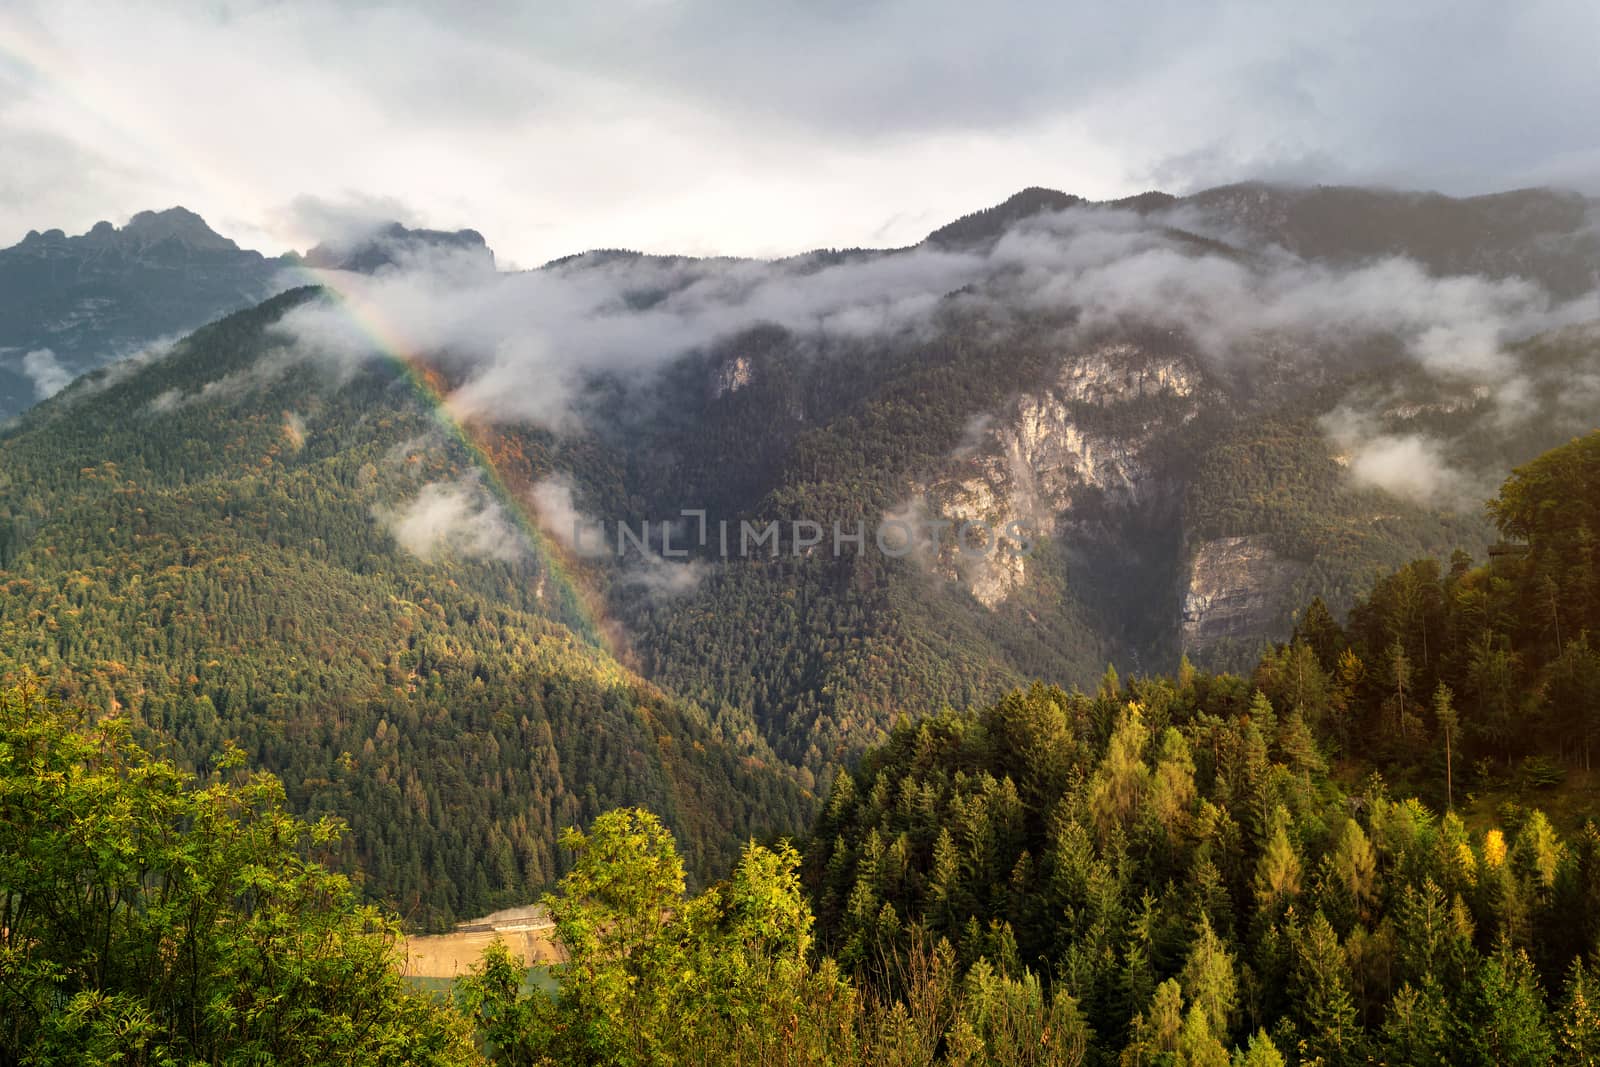 Autumn colors over the hills after the rain, Cadore, Italy, dolo by necro79